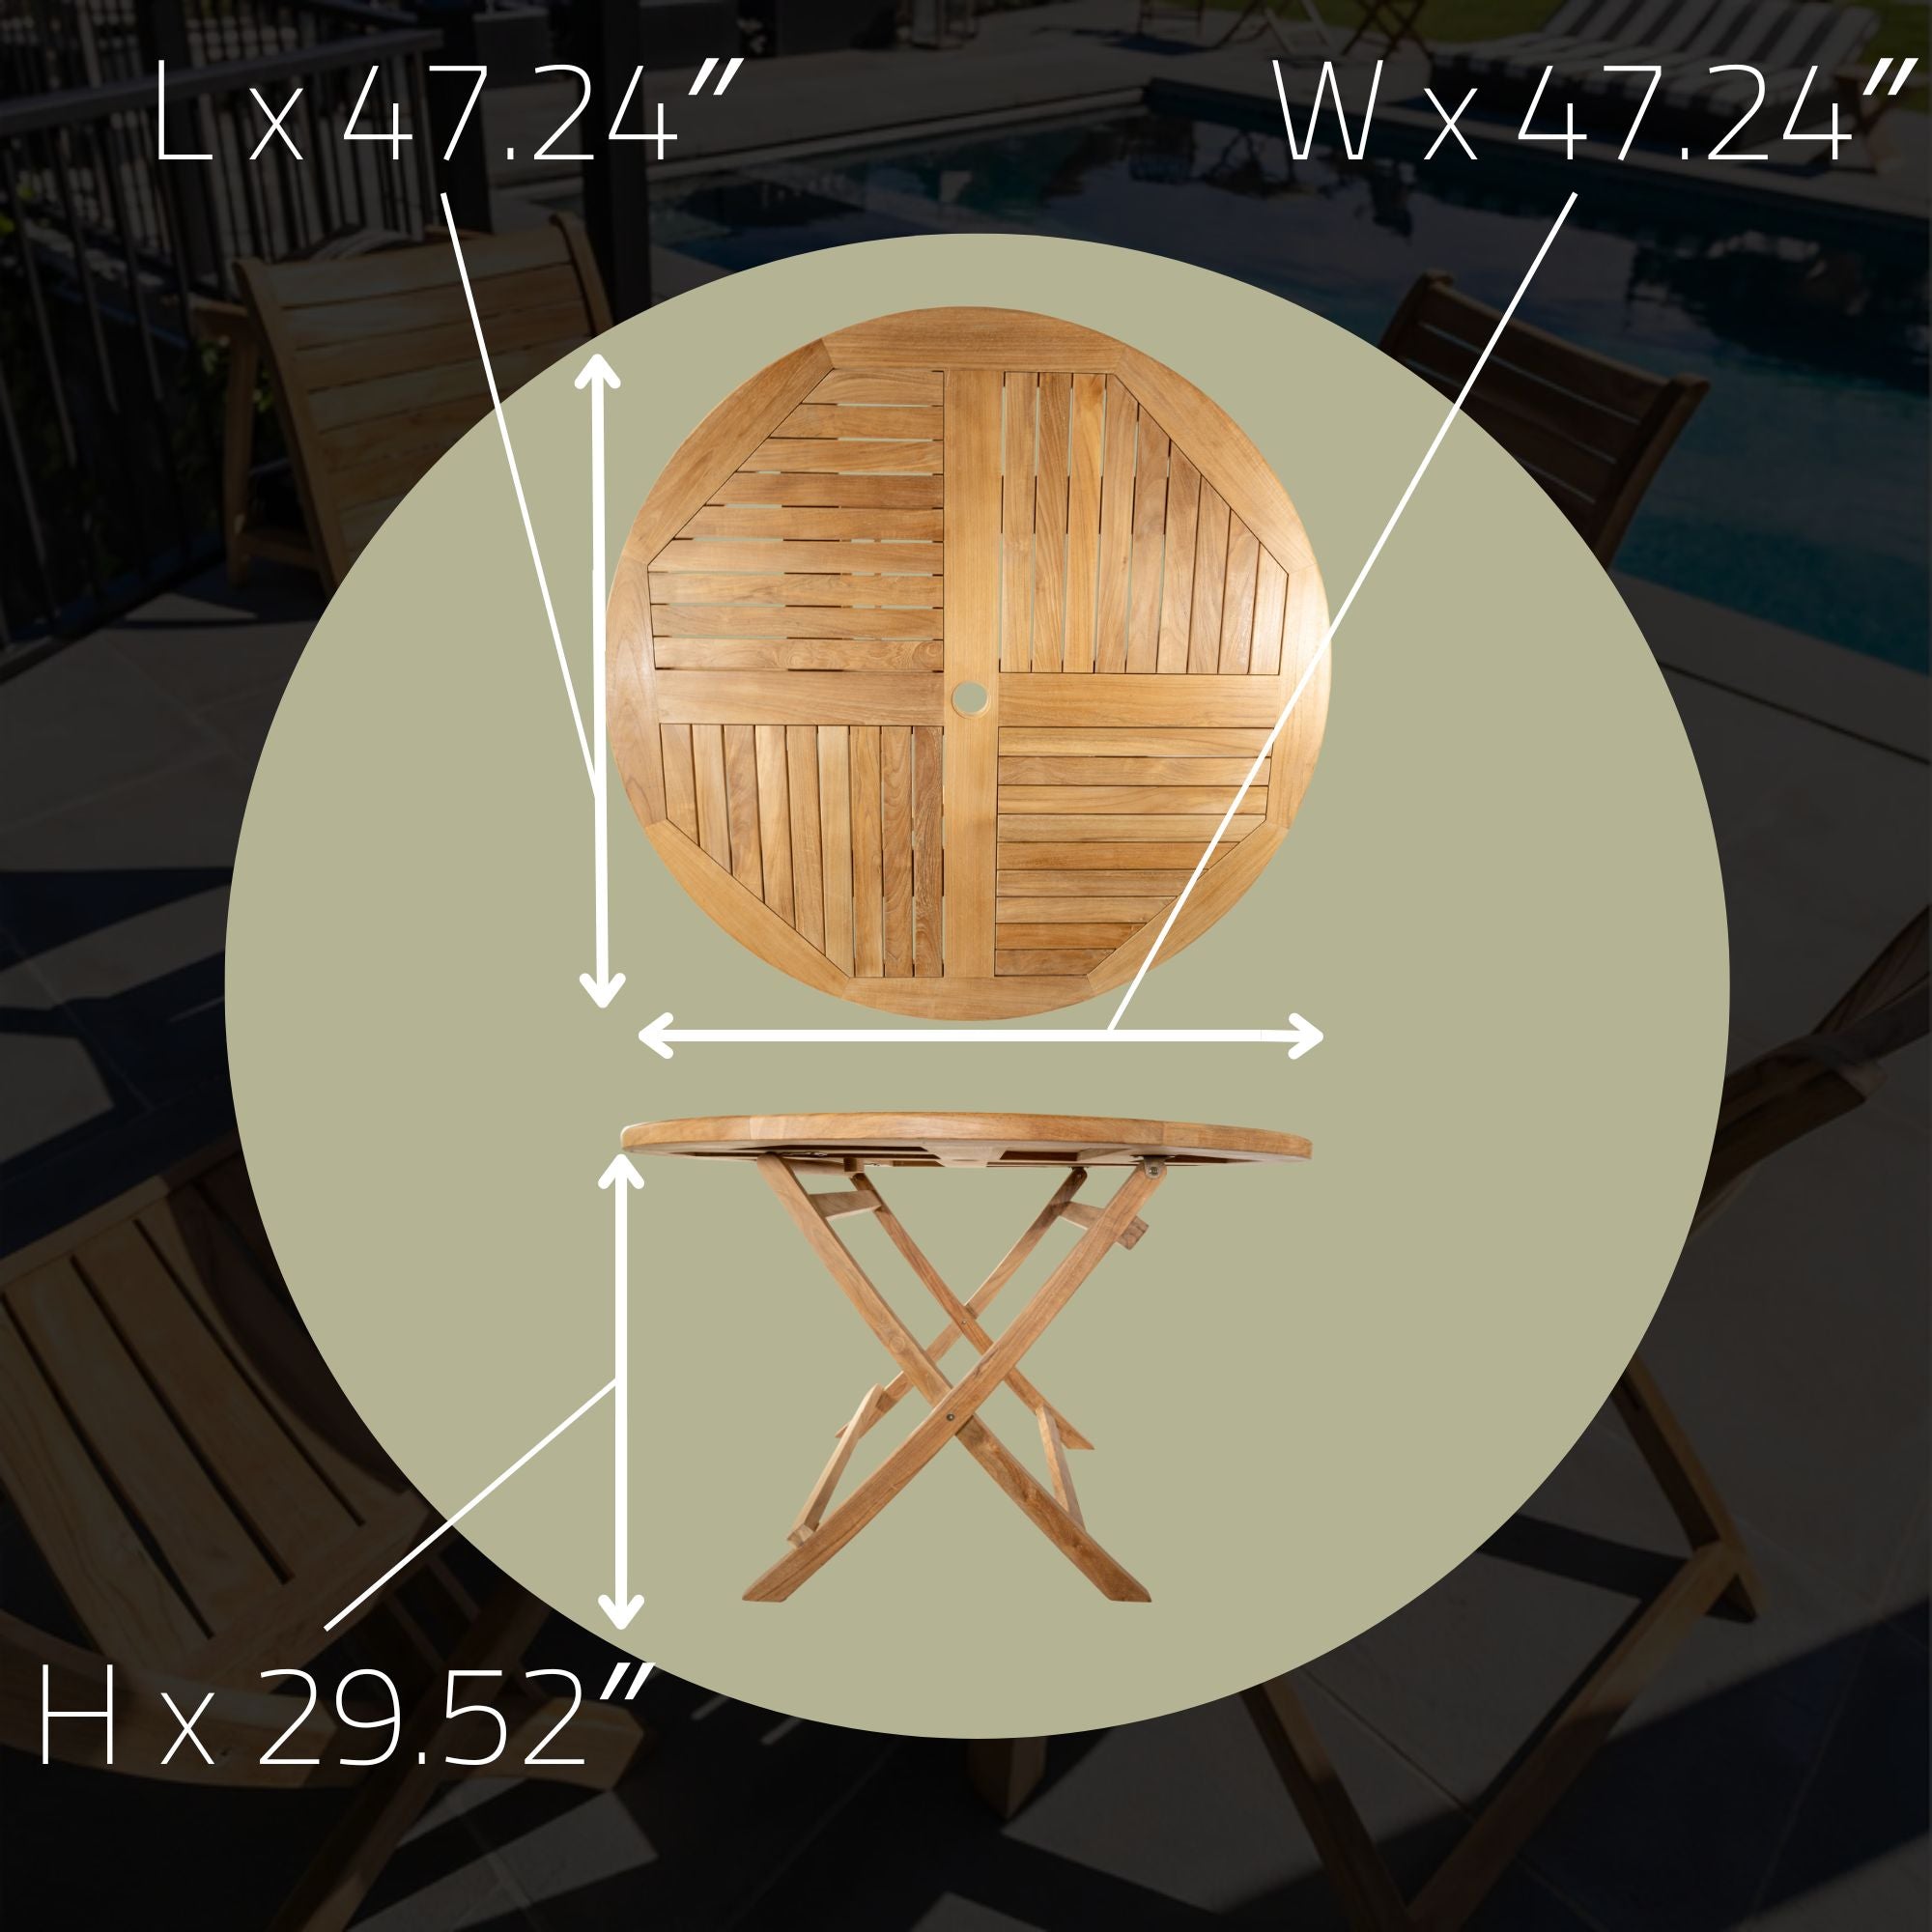 Naples Natural Teak Outdoor Foldable Round Dining Table - 47"